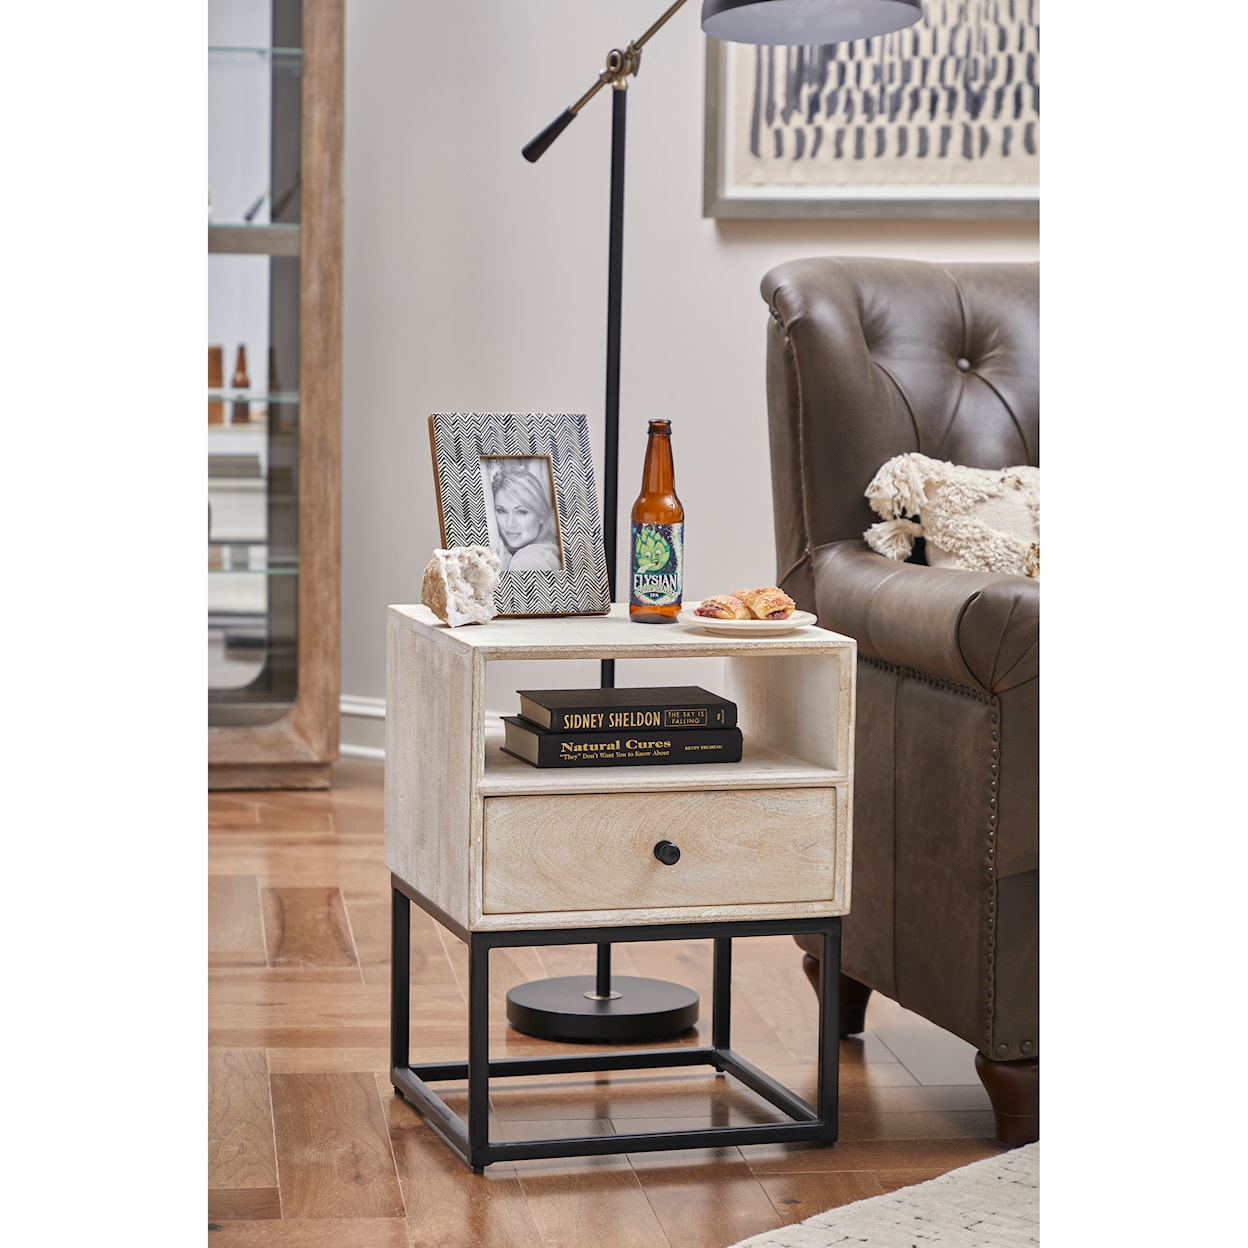 Accentrics Home Accents Mid-Century Modern Side Table